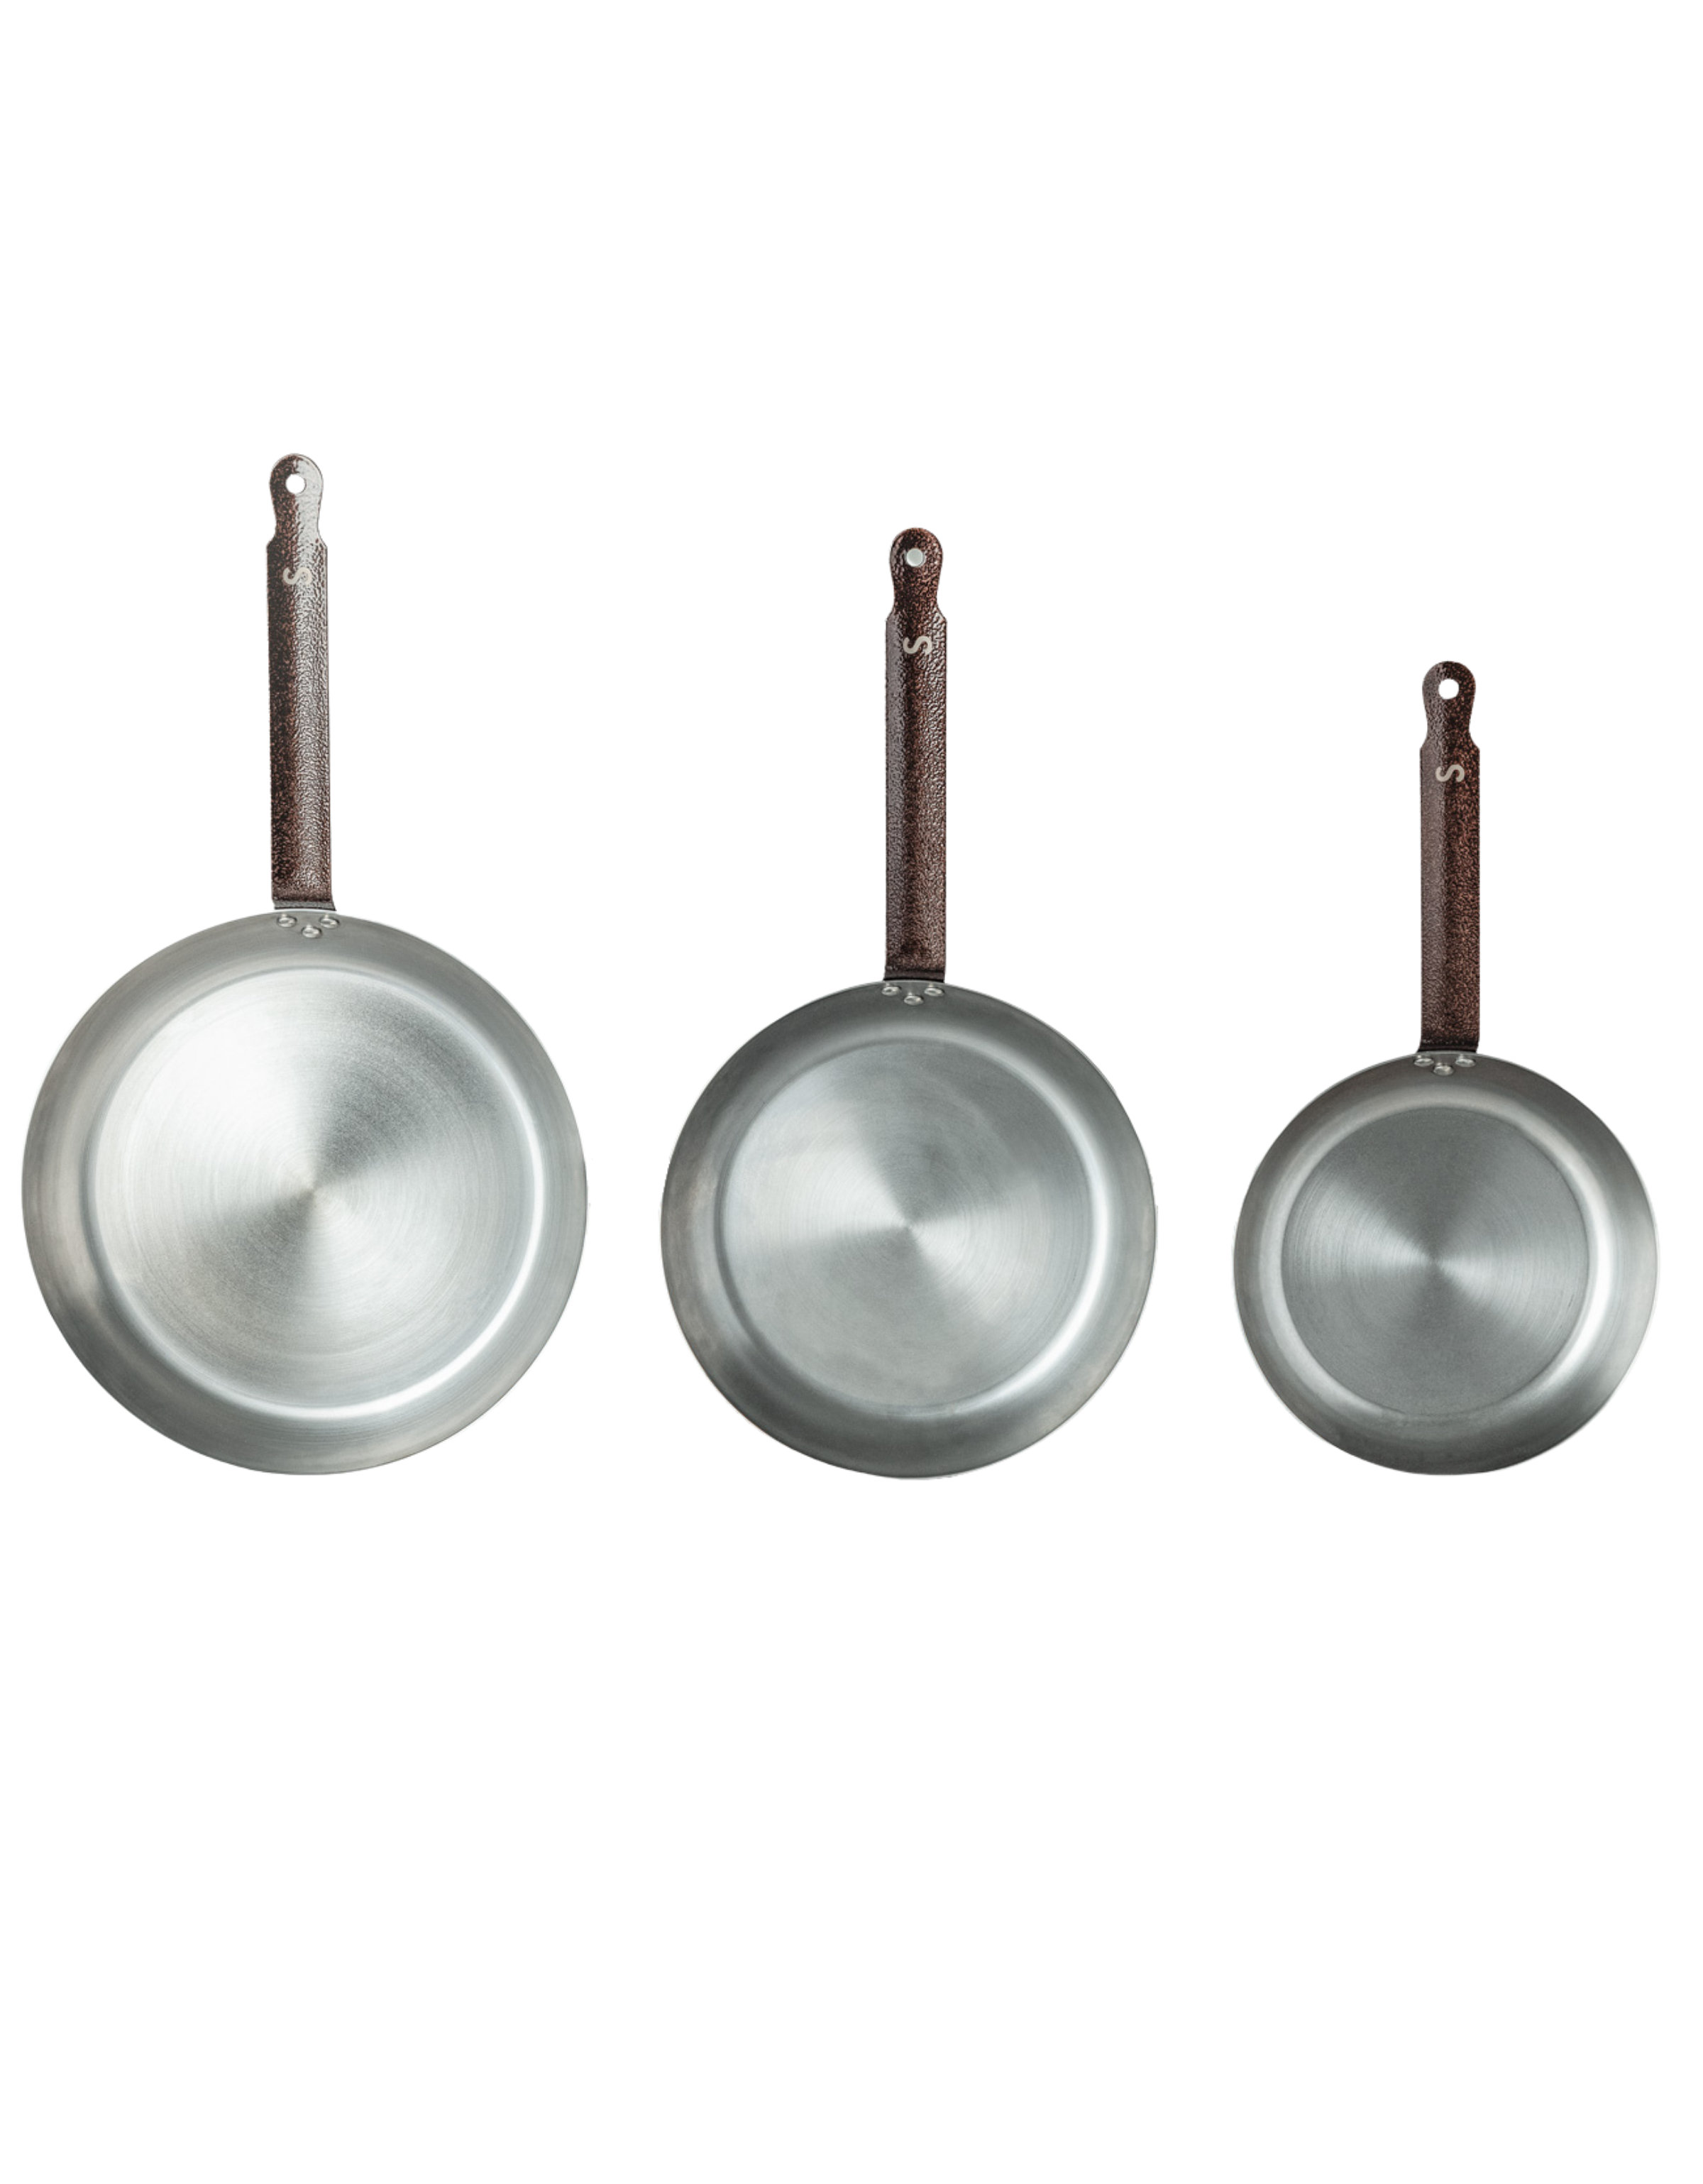 Capri 4 Piece Non-Stick Stainless Steel Cookware Set Frieling